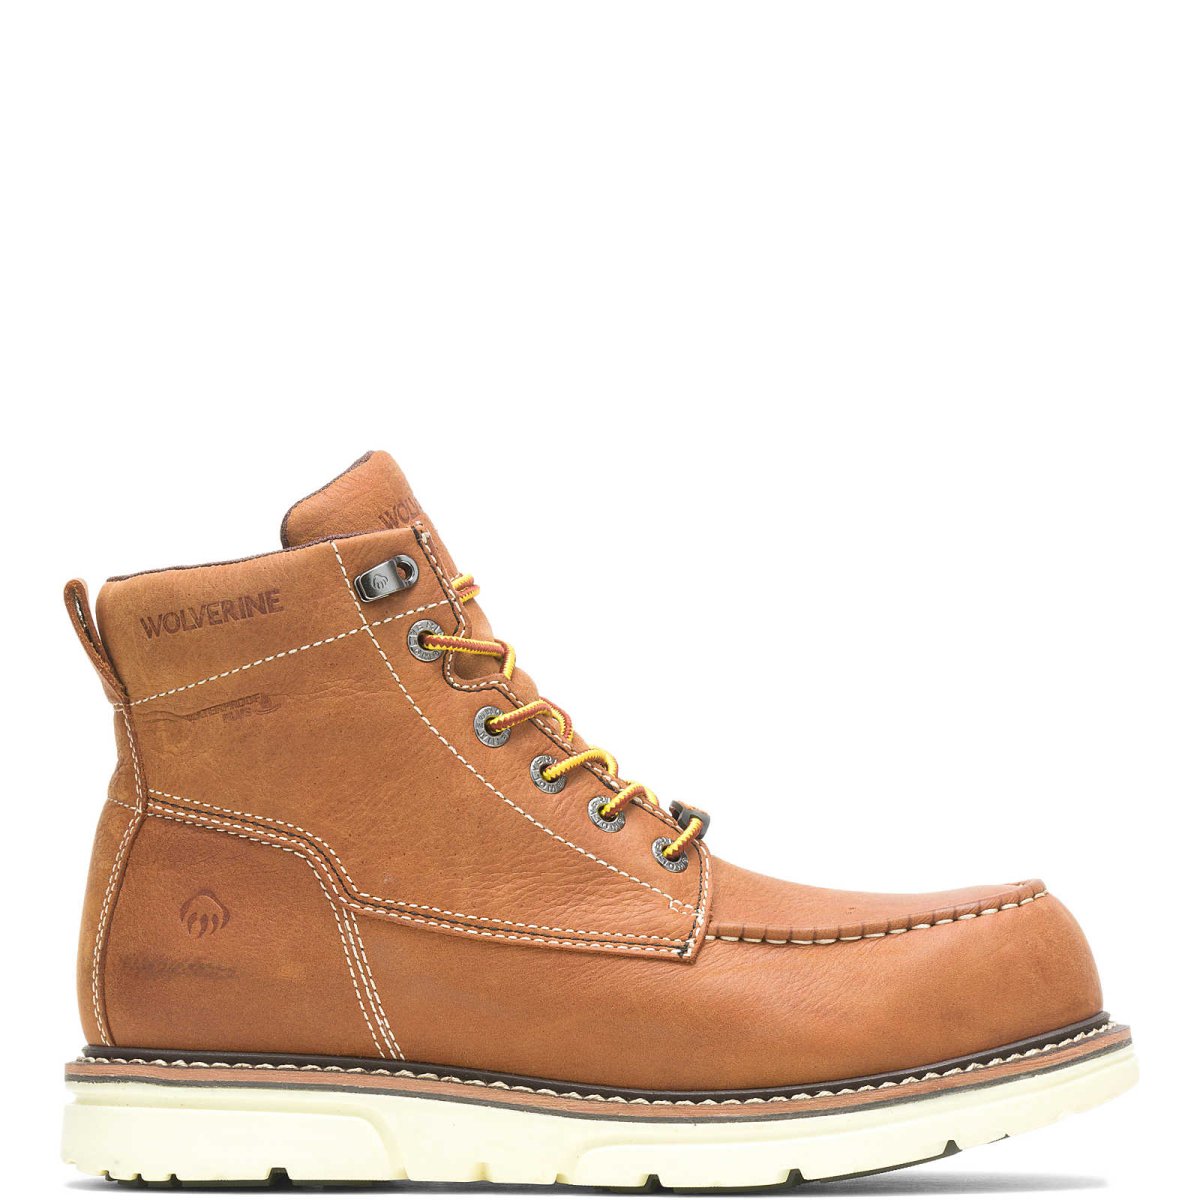 WOLVERINE I-90 DURASHOCKS® MOC-TOE CARBONMAX® 6" WORK BOOT (W201097) IN TAN - TLW Shoes